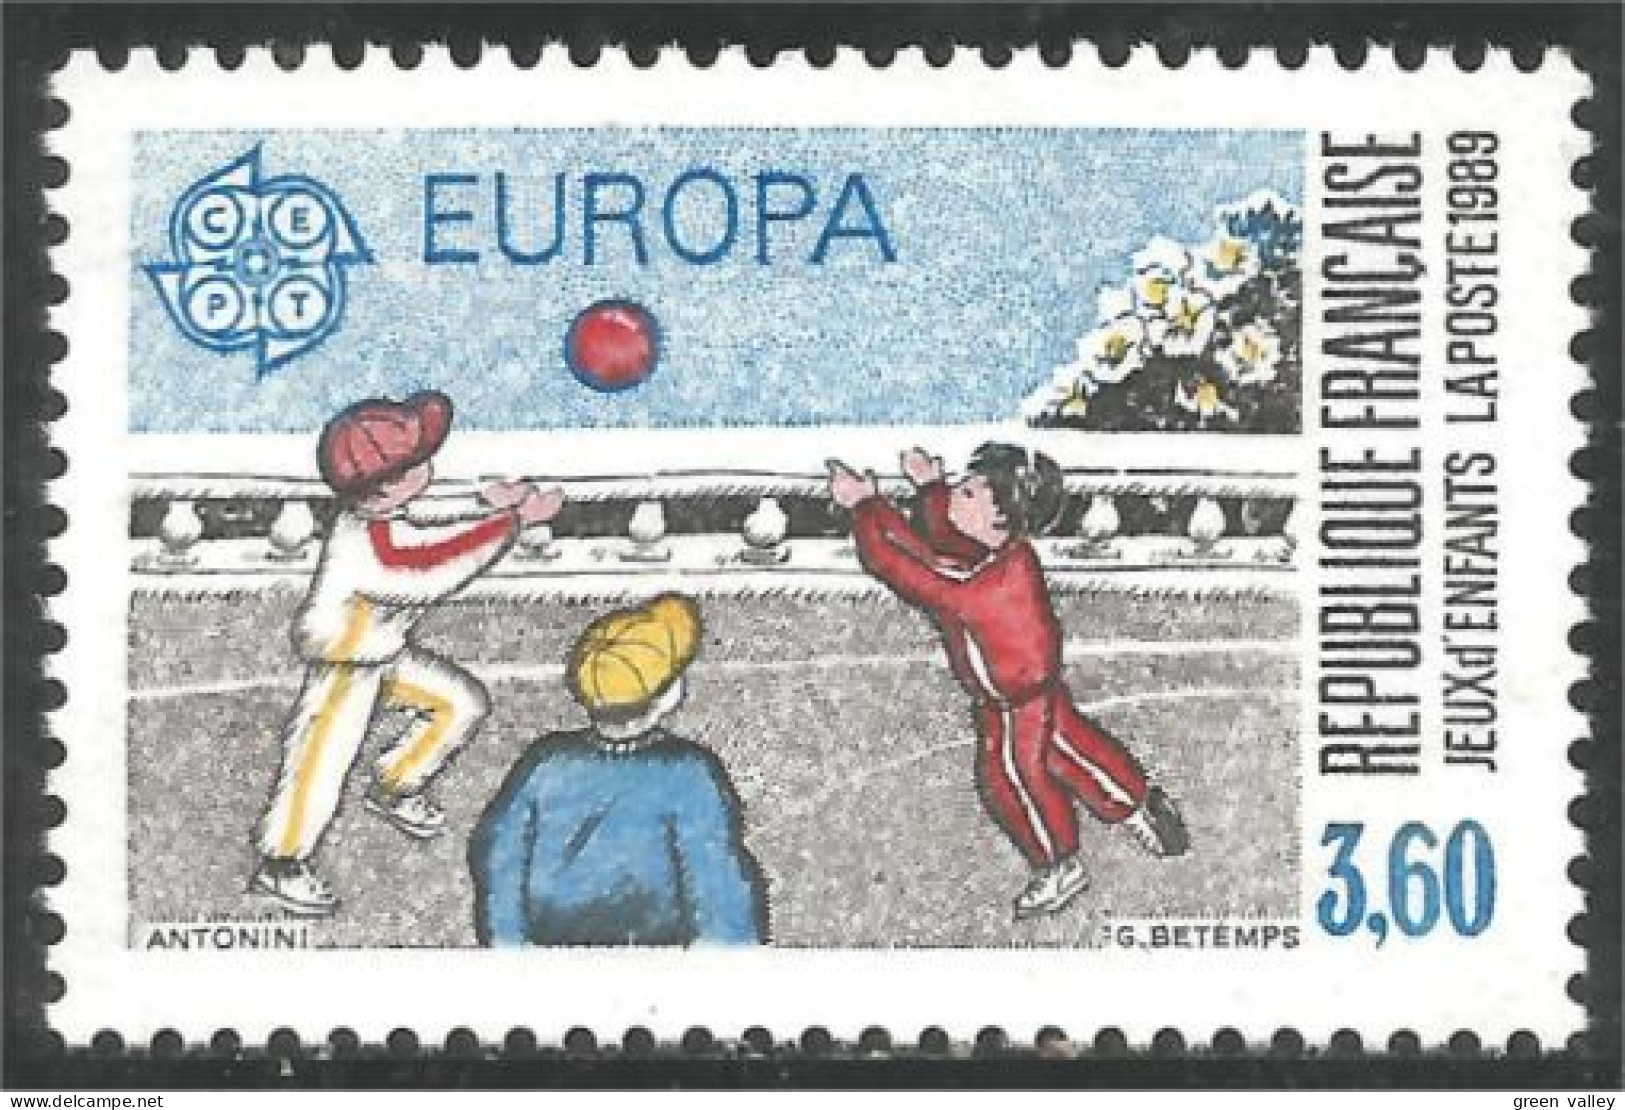 355 France Yv 2585 Europa Jeu Balle Ball Game MNH ** Neuf SC (2585-1c) - Unclassified